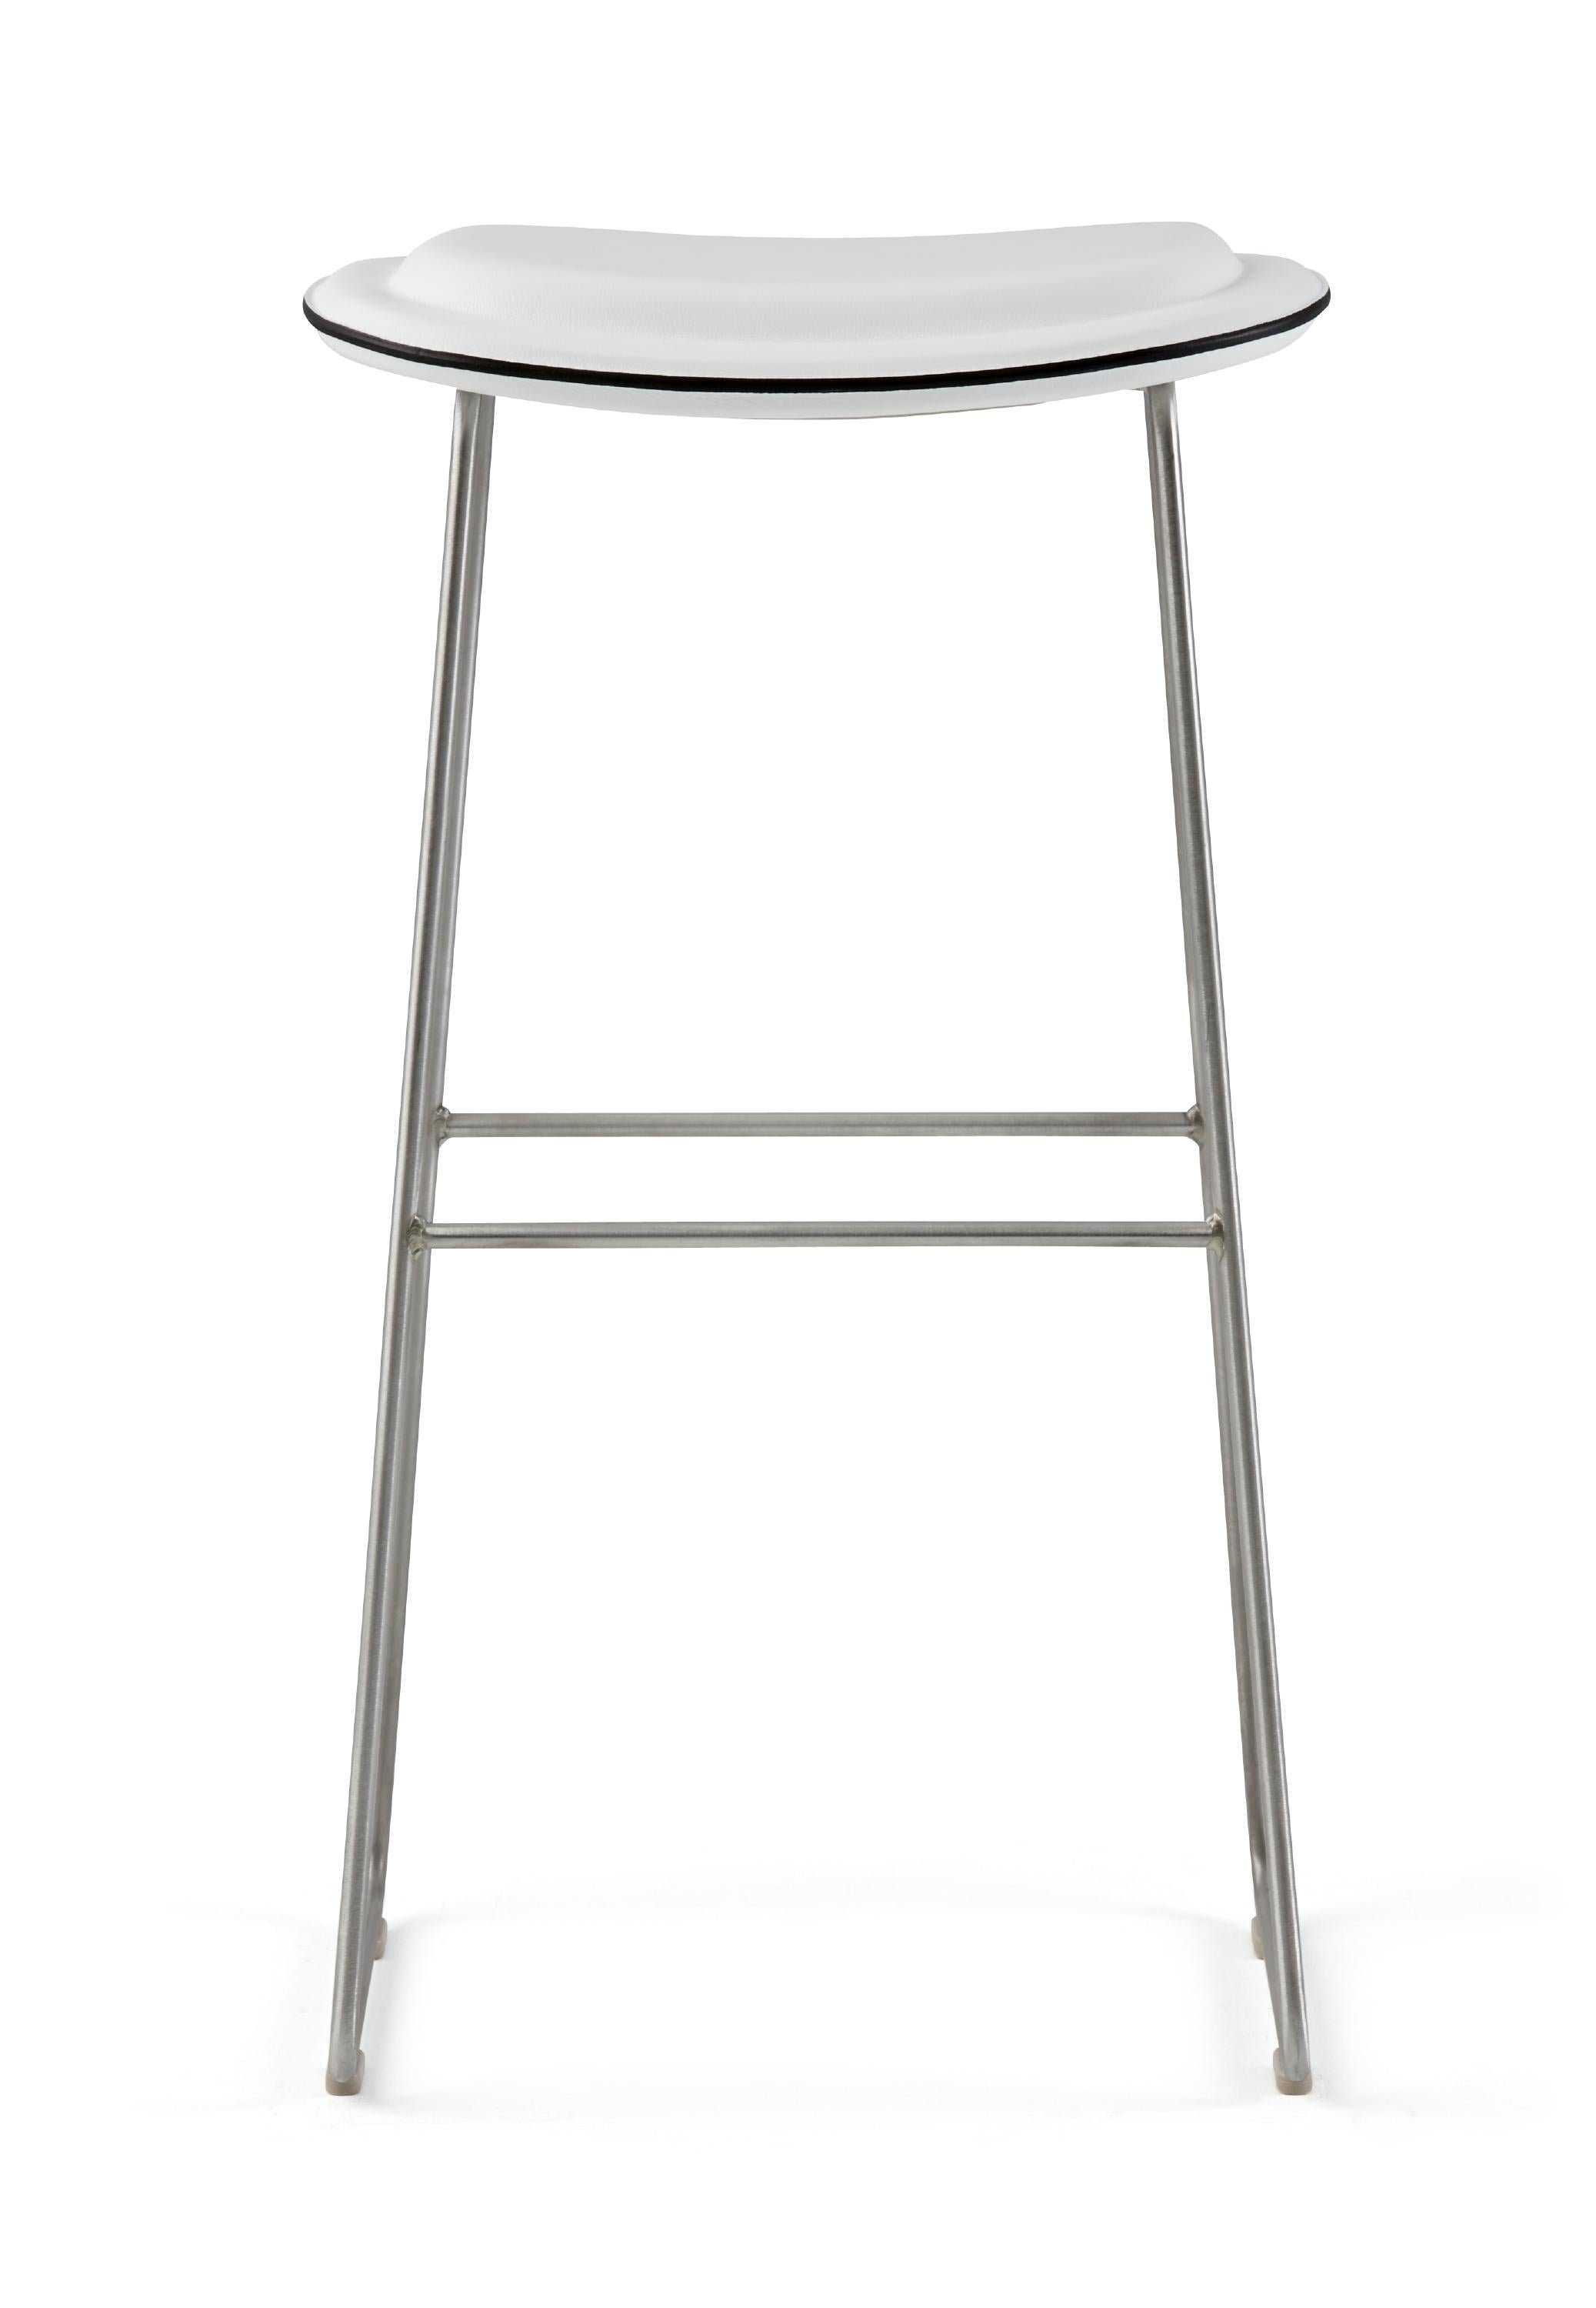 For Sale: White (Leather 900) Jasper Morrison Large Hi Pad Stool in Fabric or Leather Upholstery by Cappellini 2